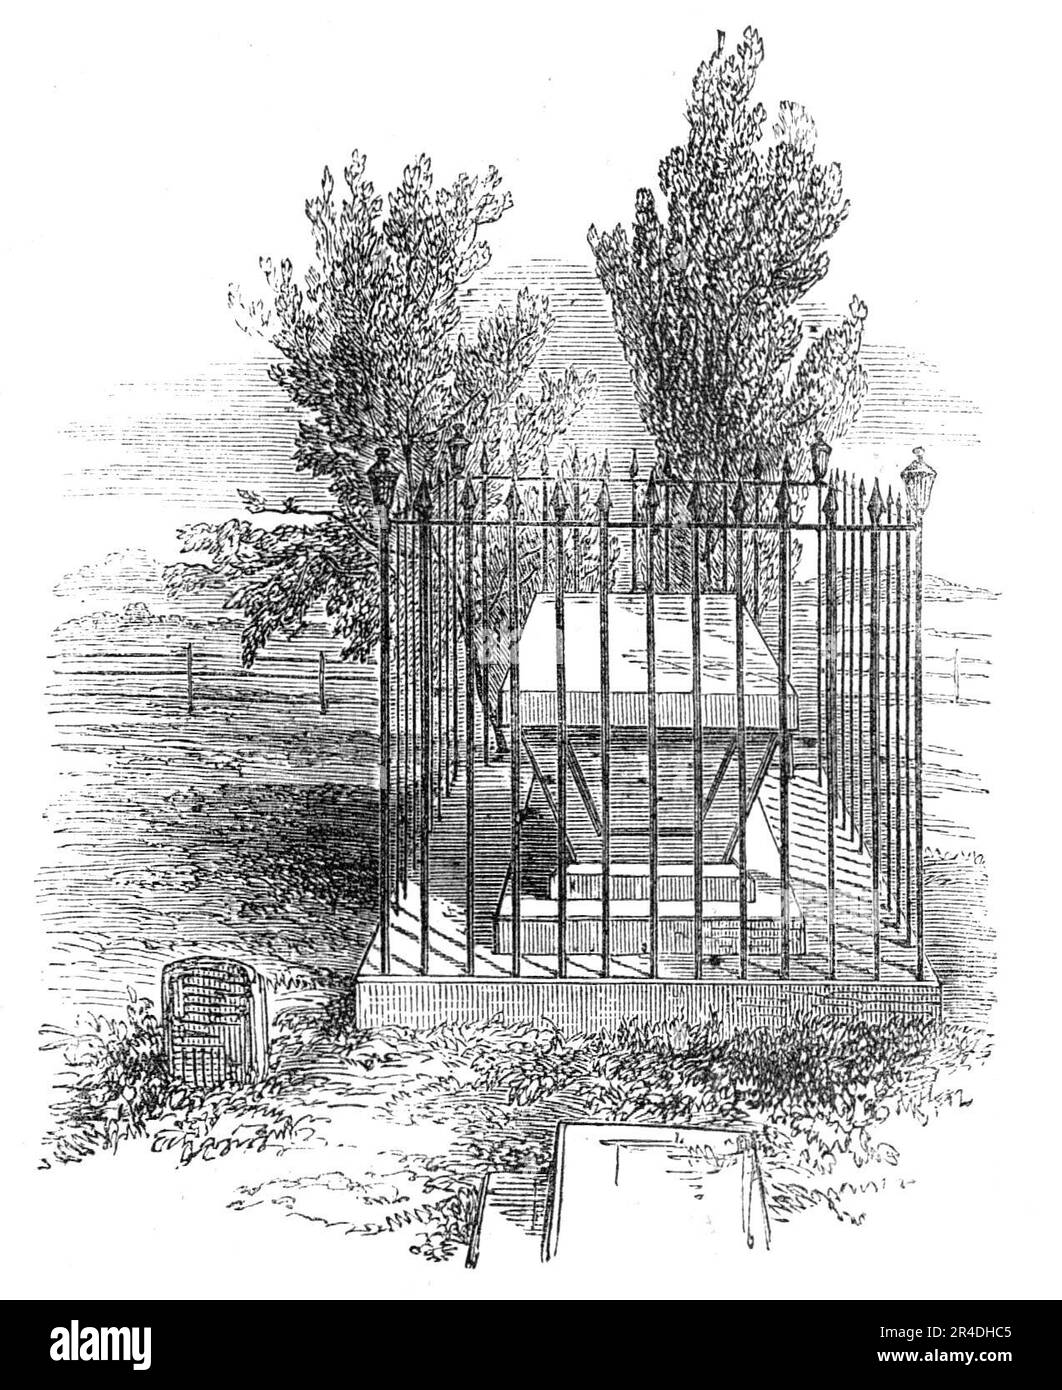 Family Grave of the Palmers, at Rugeley, 1856. English doctor William Palmer, also known as the Rugeley Poisoner or the Prince of Poisoners, was found guilty of murder in one of the most notorious cases of the 19th century. Palmer got into debt through gambling on horse races, and took out life insurance policies on his wife and brother Walter. His friend John Parsons Cook became ill after drinking gin which Palmer had poisoned with strychnine. Palmer was arrested on the charge of murder and forgery - Palmer had been forging his mother's signature to defraud her - was tried at the Old Bailey i Stock Photo